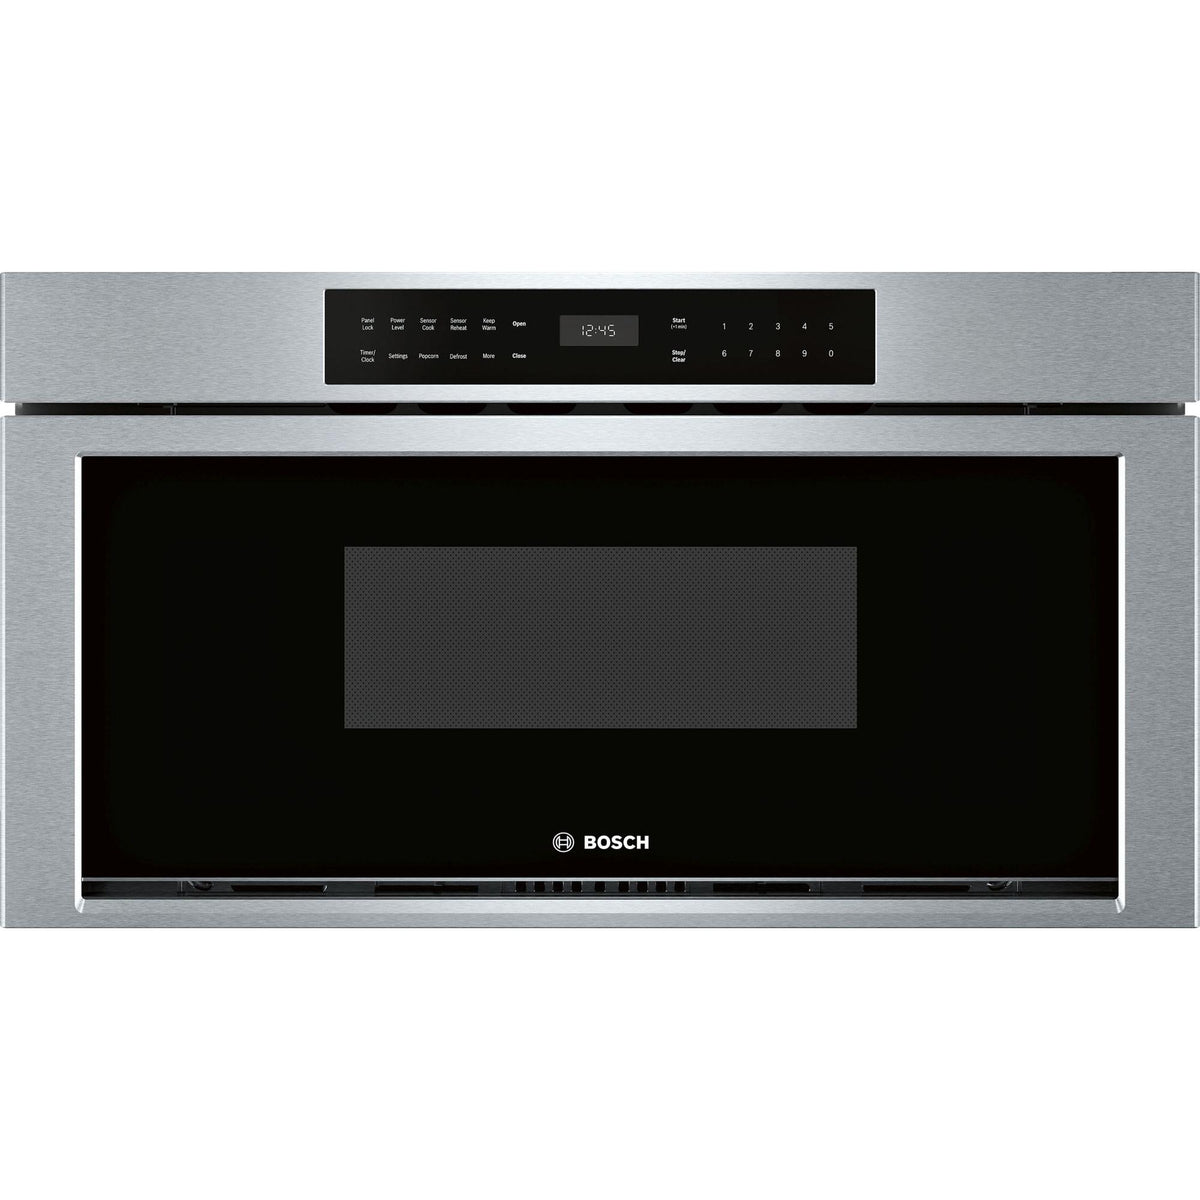 Bosch 30-inch, 1.2 cu. ft. Drawer Microwave Oven HMD8053UC IMAGE 1